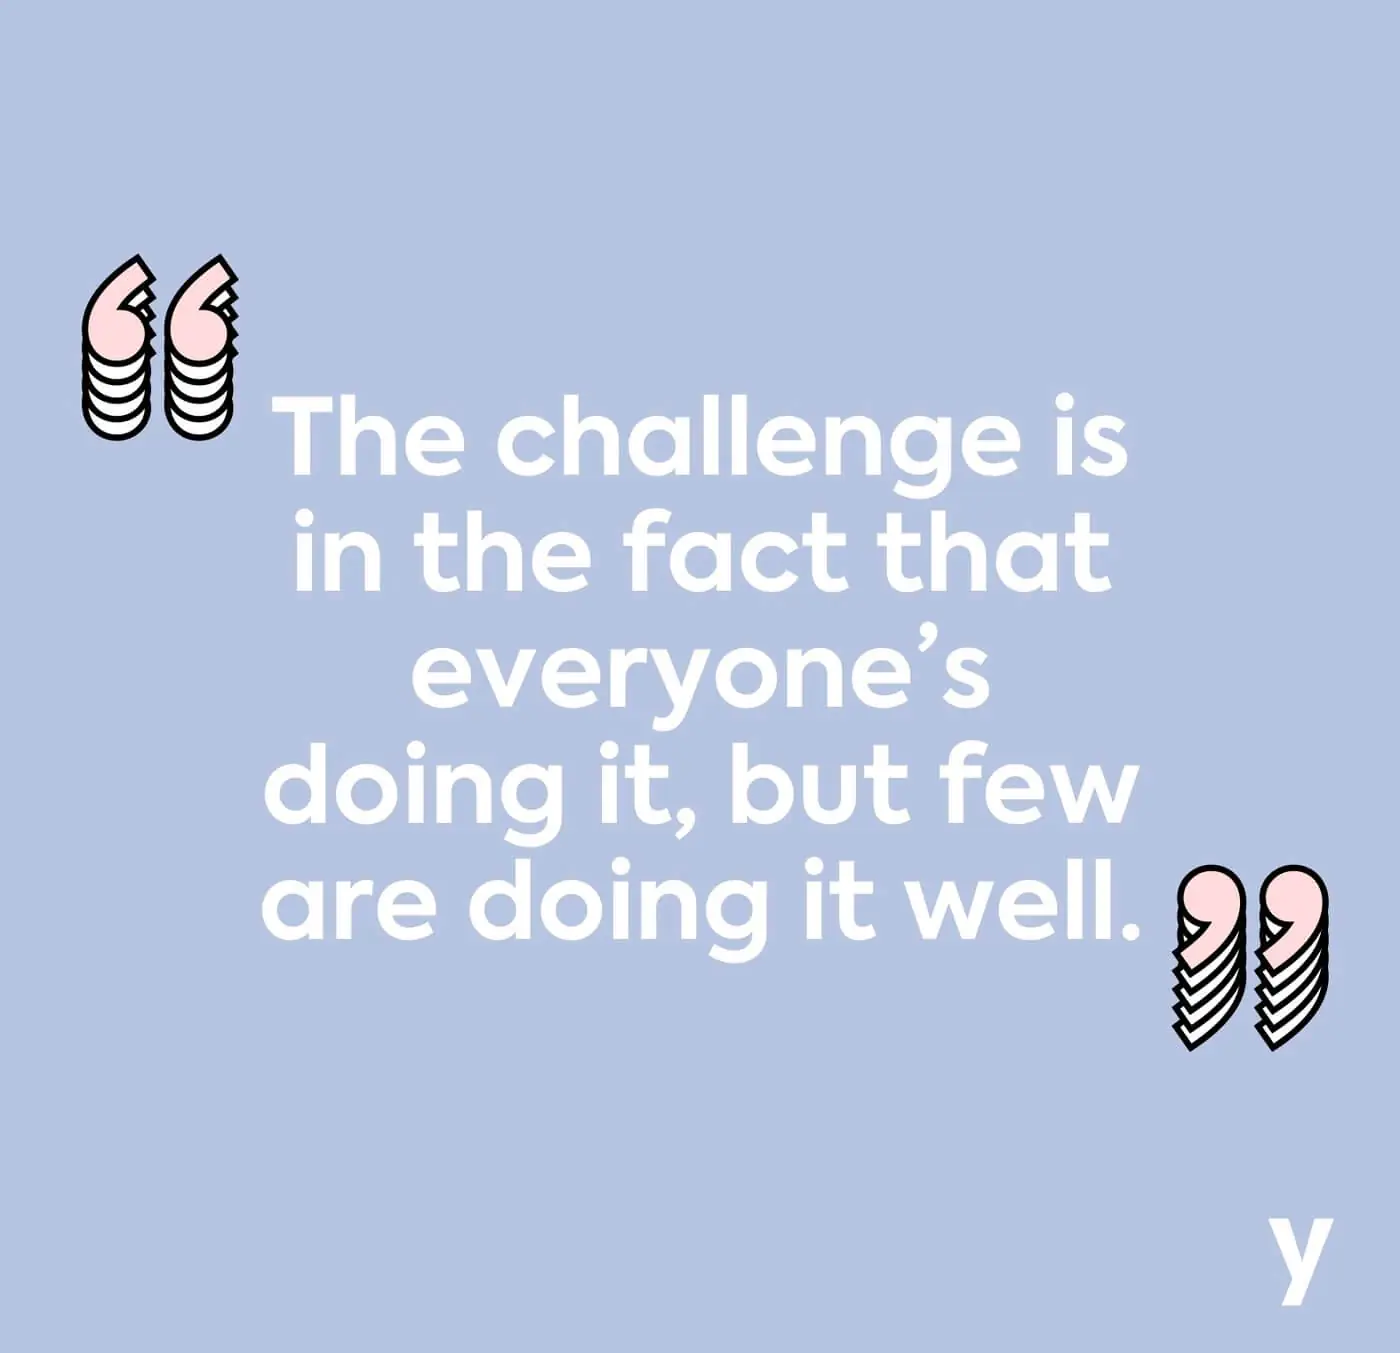 The challenge is the fact that everyone's doing it, but few are doing it well.